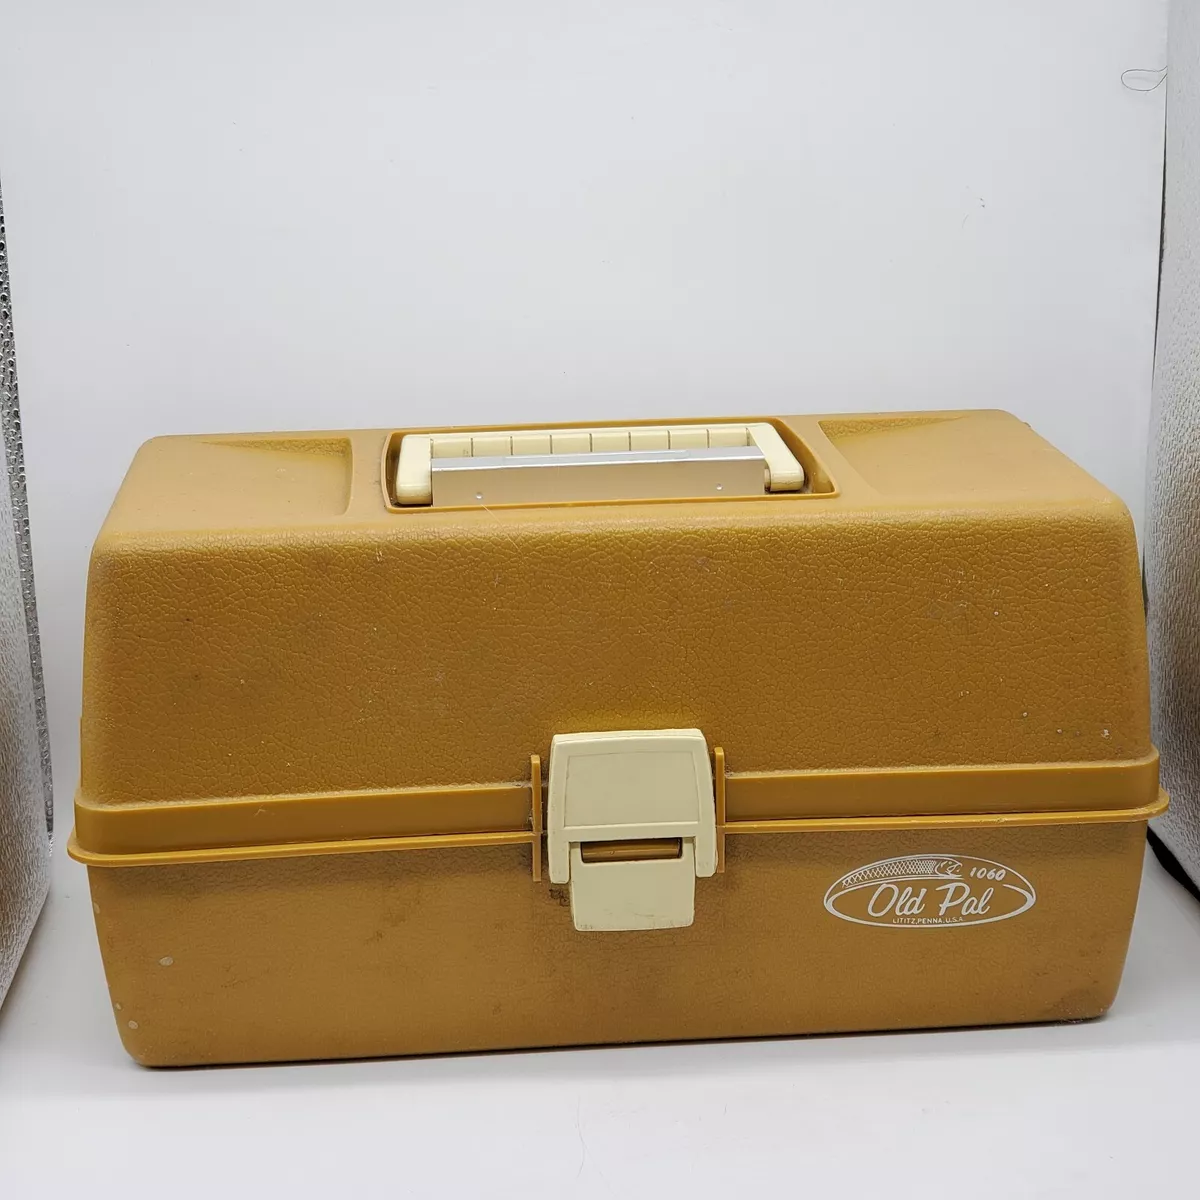 Old Pal Vintage Tackle Box #1060 3 Lift Trays Made in USA Gold Lure Case  Holder